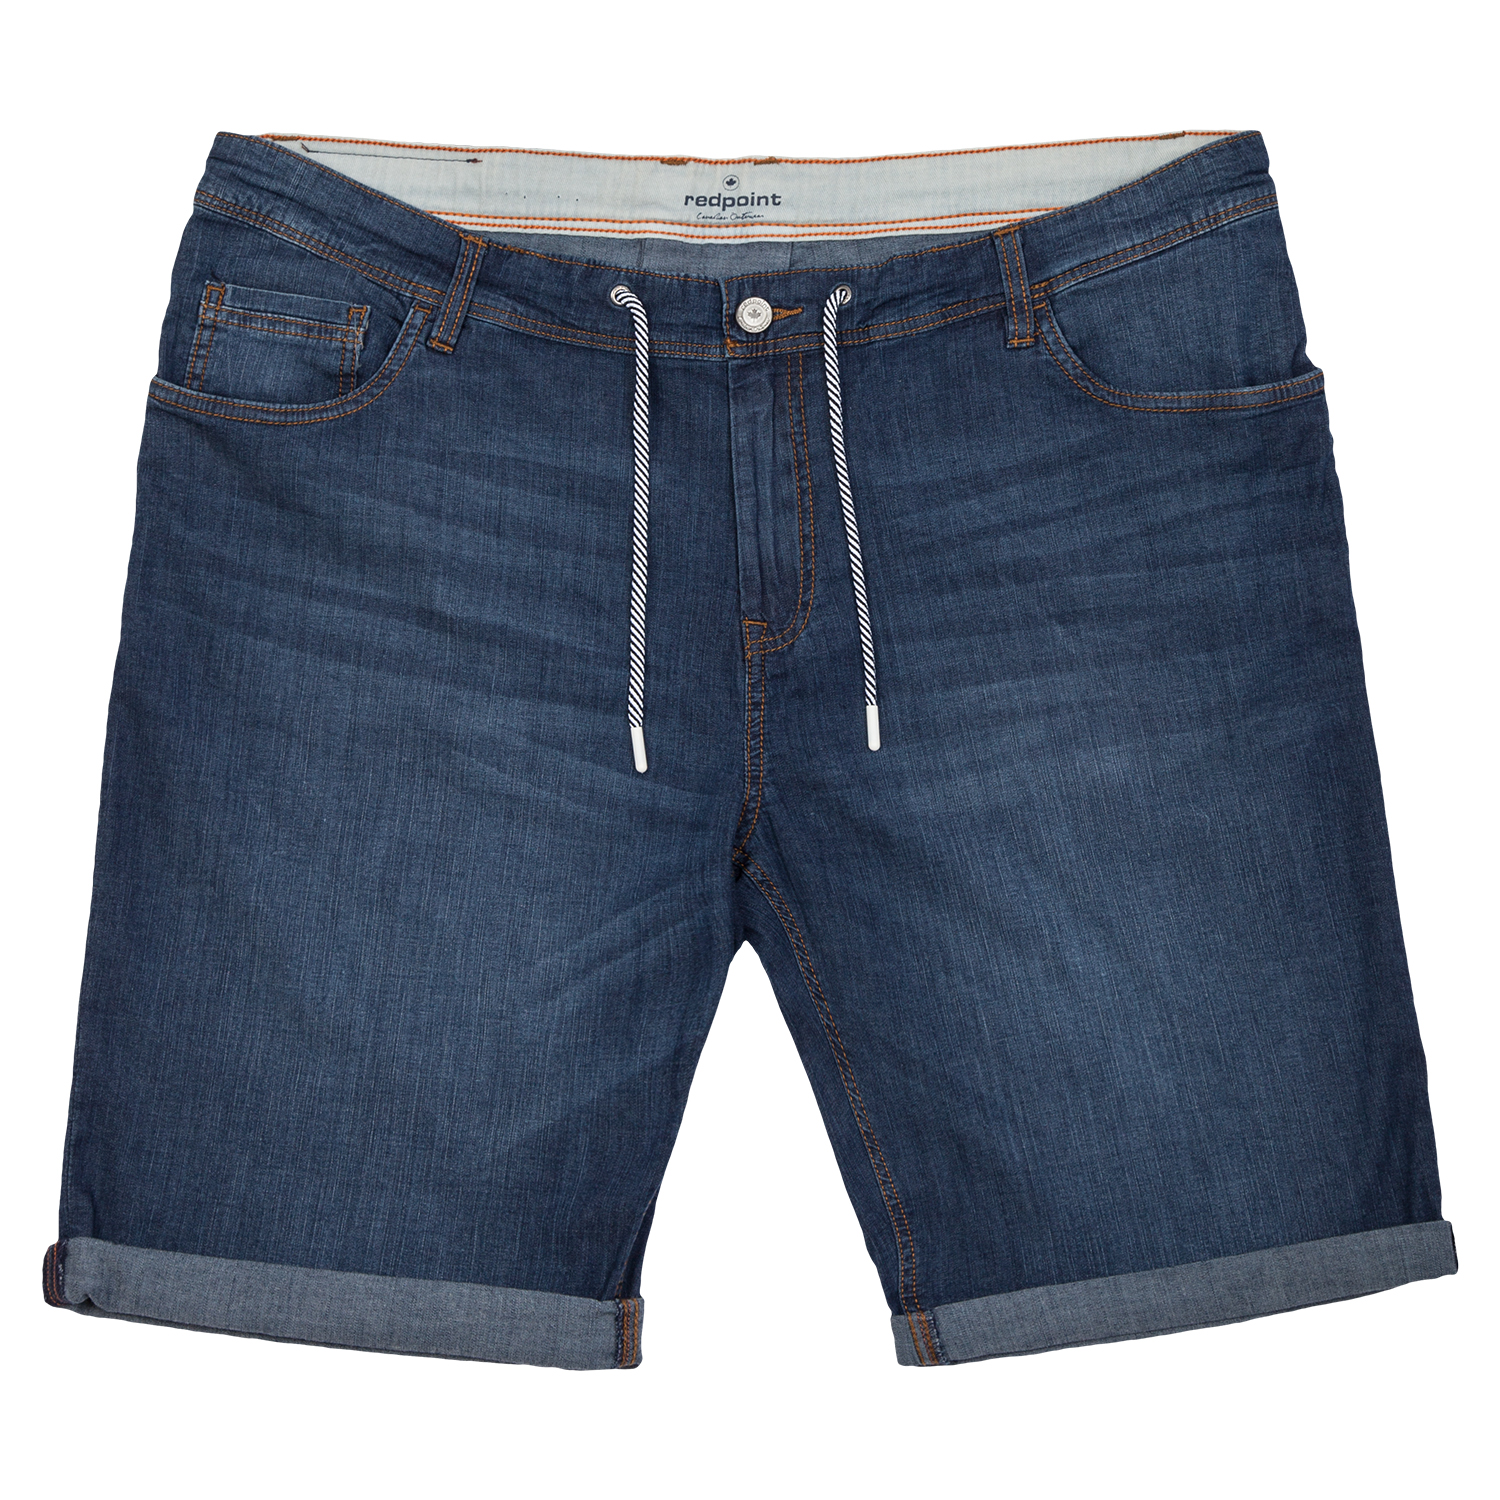 Jeans shorts in dark blue for men by redpoint model Markham up to oversize 54